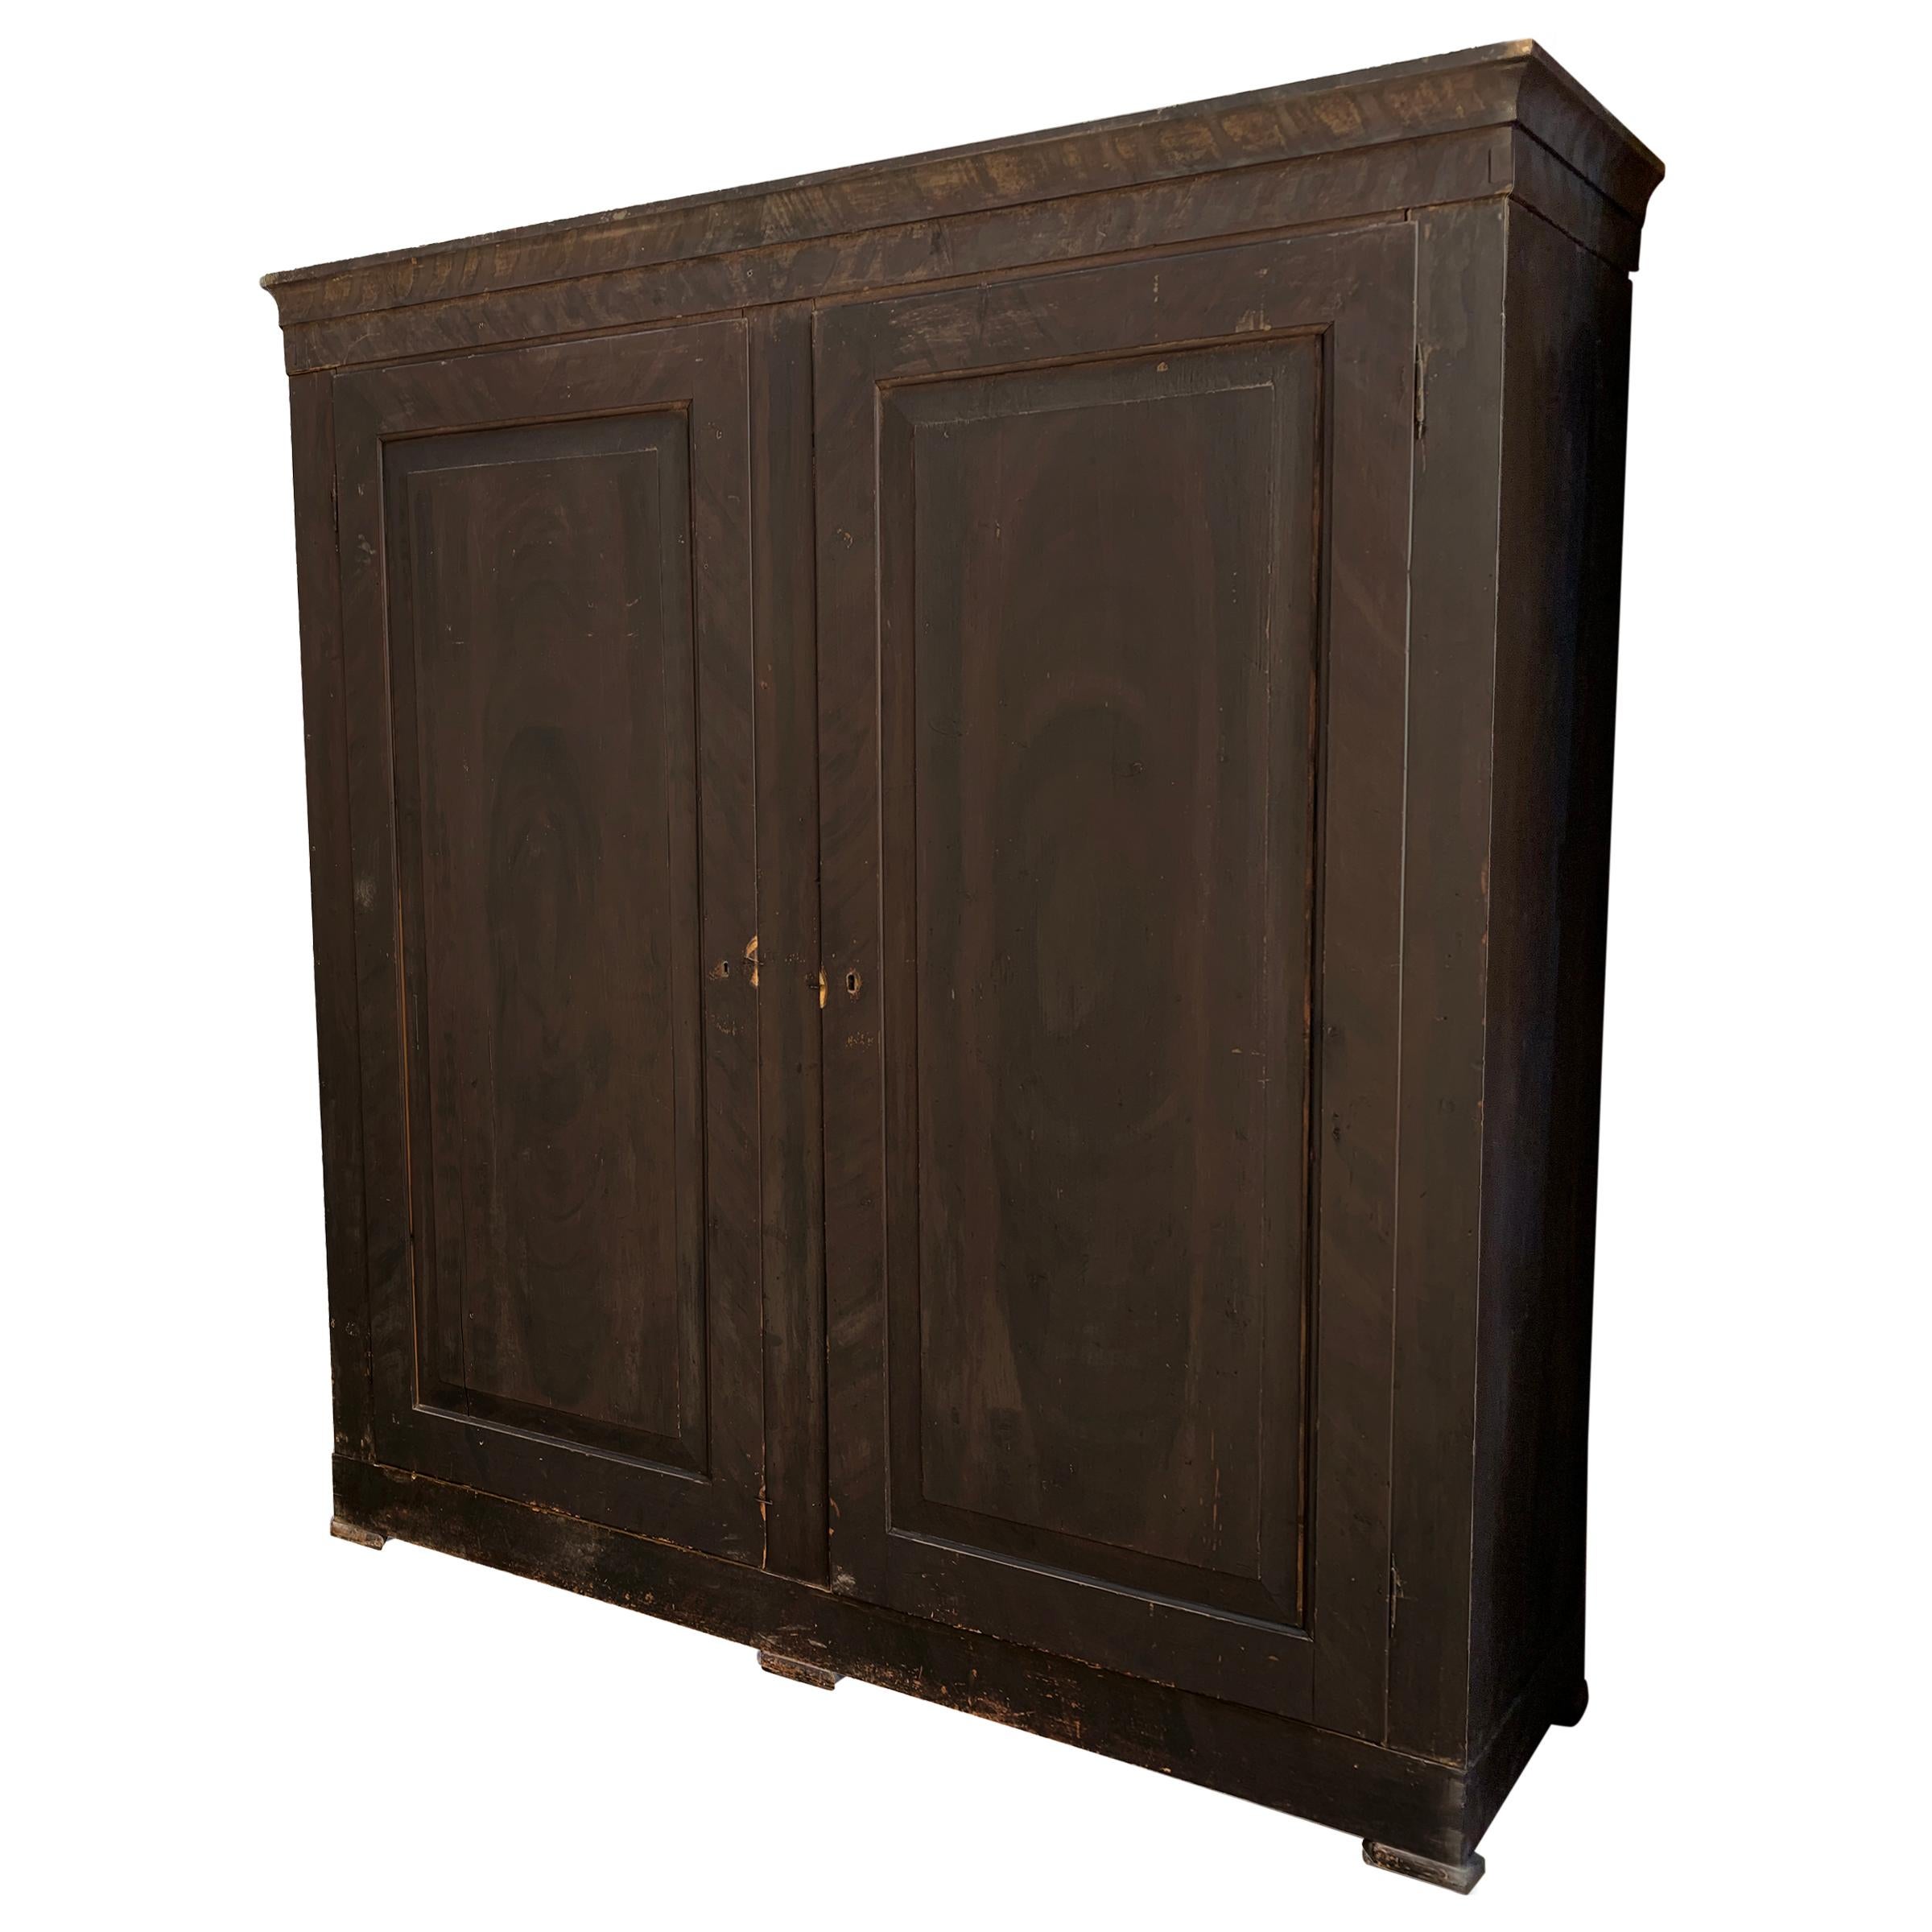 An outstanding grande-scale 18th century Italian pine two-door cabinet with a folky faux wood grain painted finish and one shelf on the interior. Cabinet comes completely apart so it's perfect for city apartment installations.